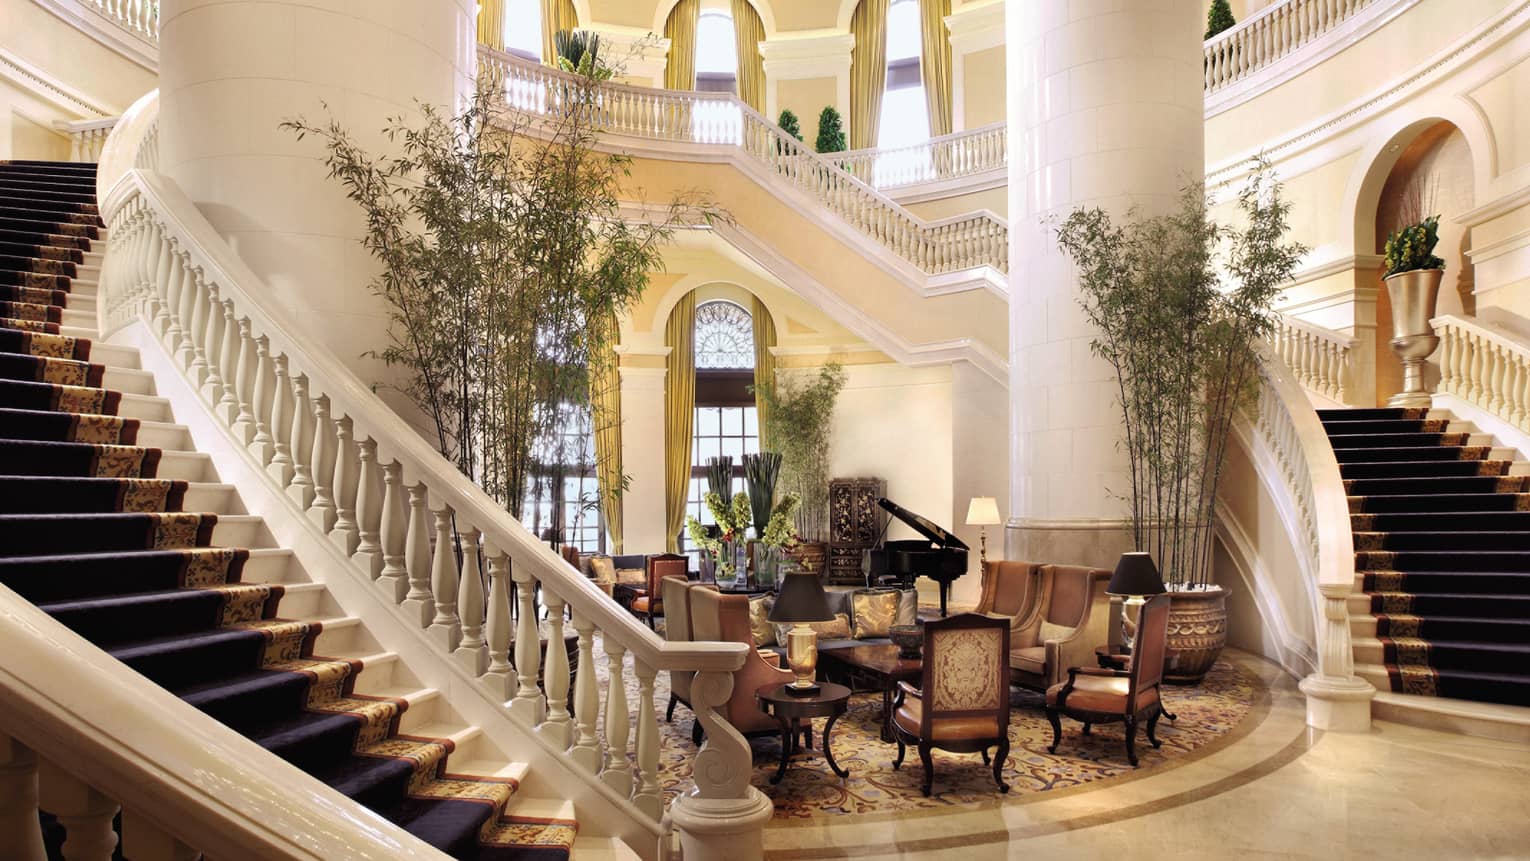 Hotel lobby with two grand staircases around large white pillars, seating area